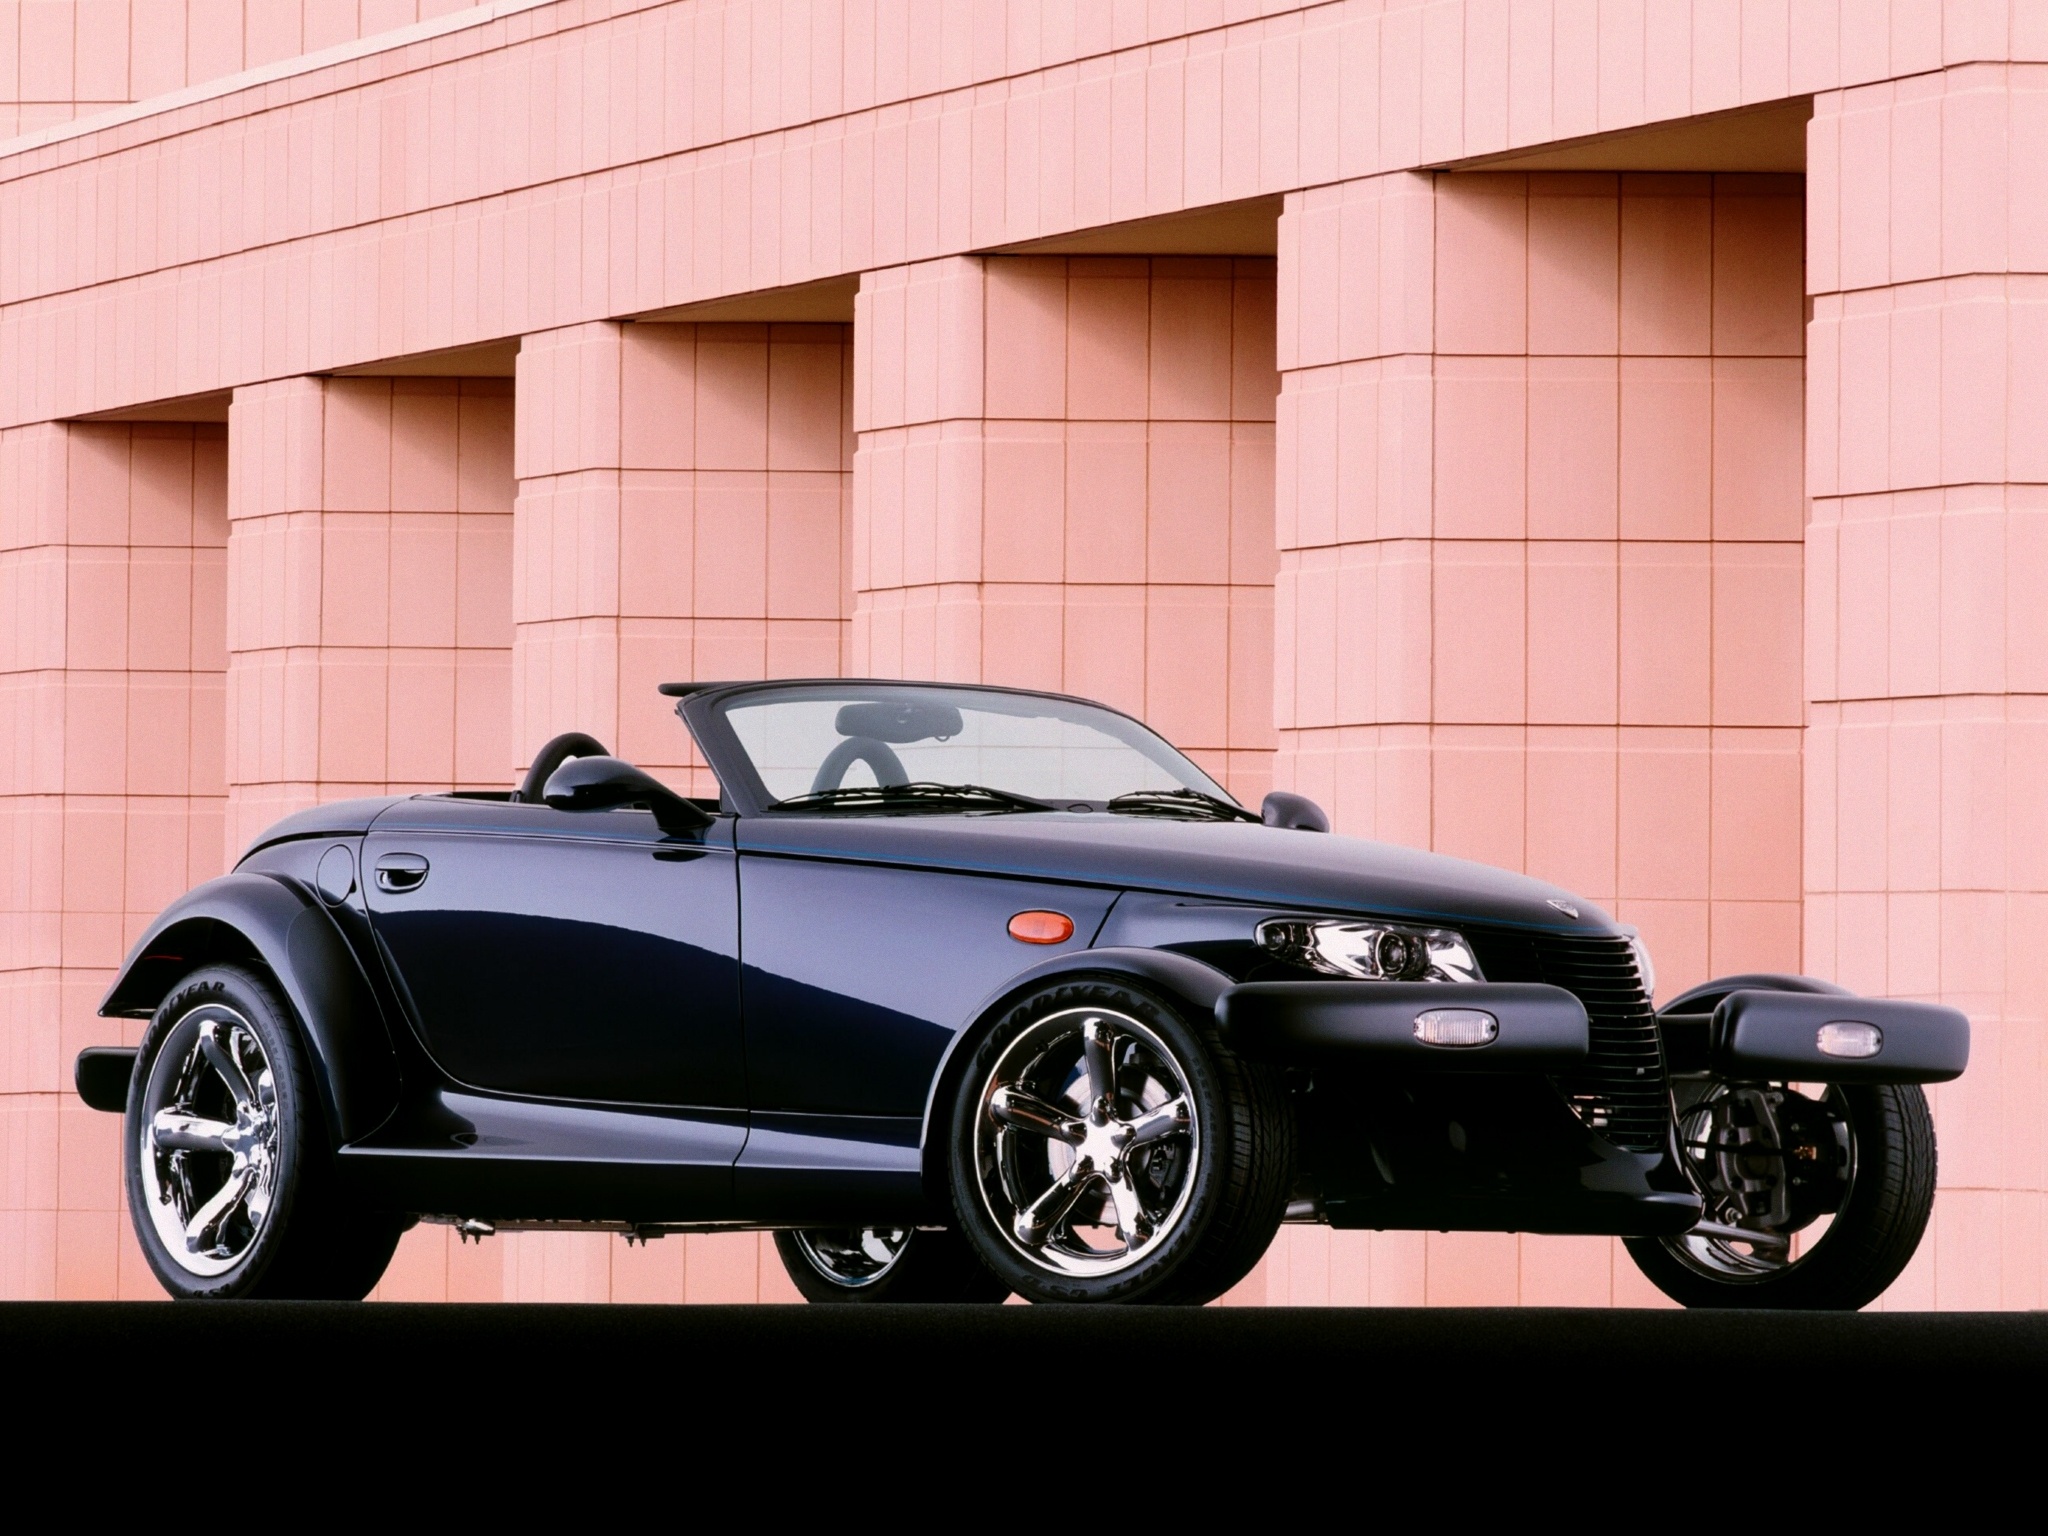 Plymouth Prowler, Exquisite wallpaper, Luxury performance, Automotive excellence, 2050x1540 HD Desktop